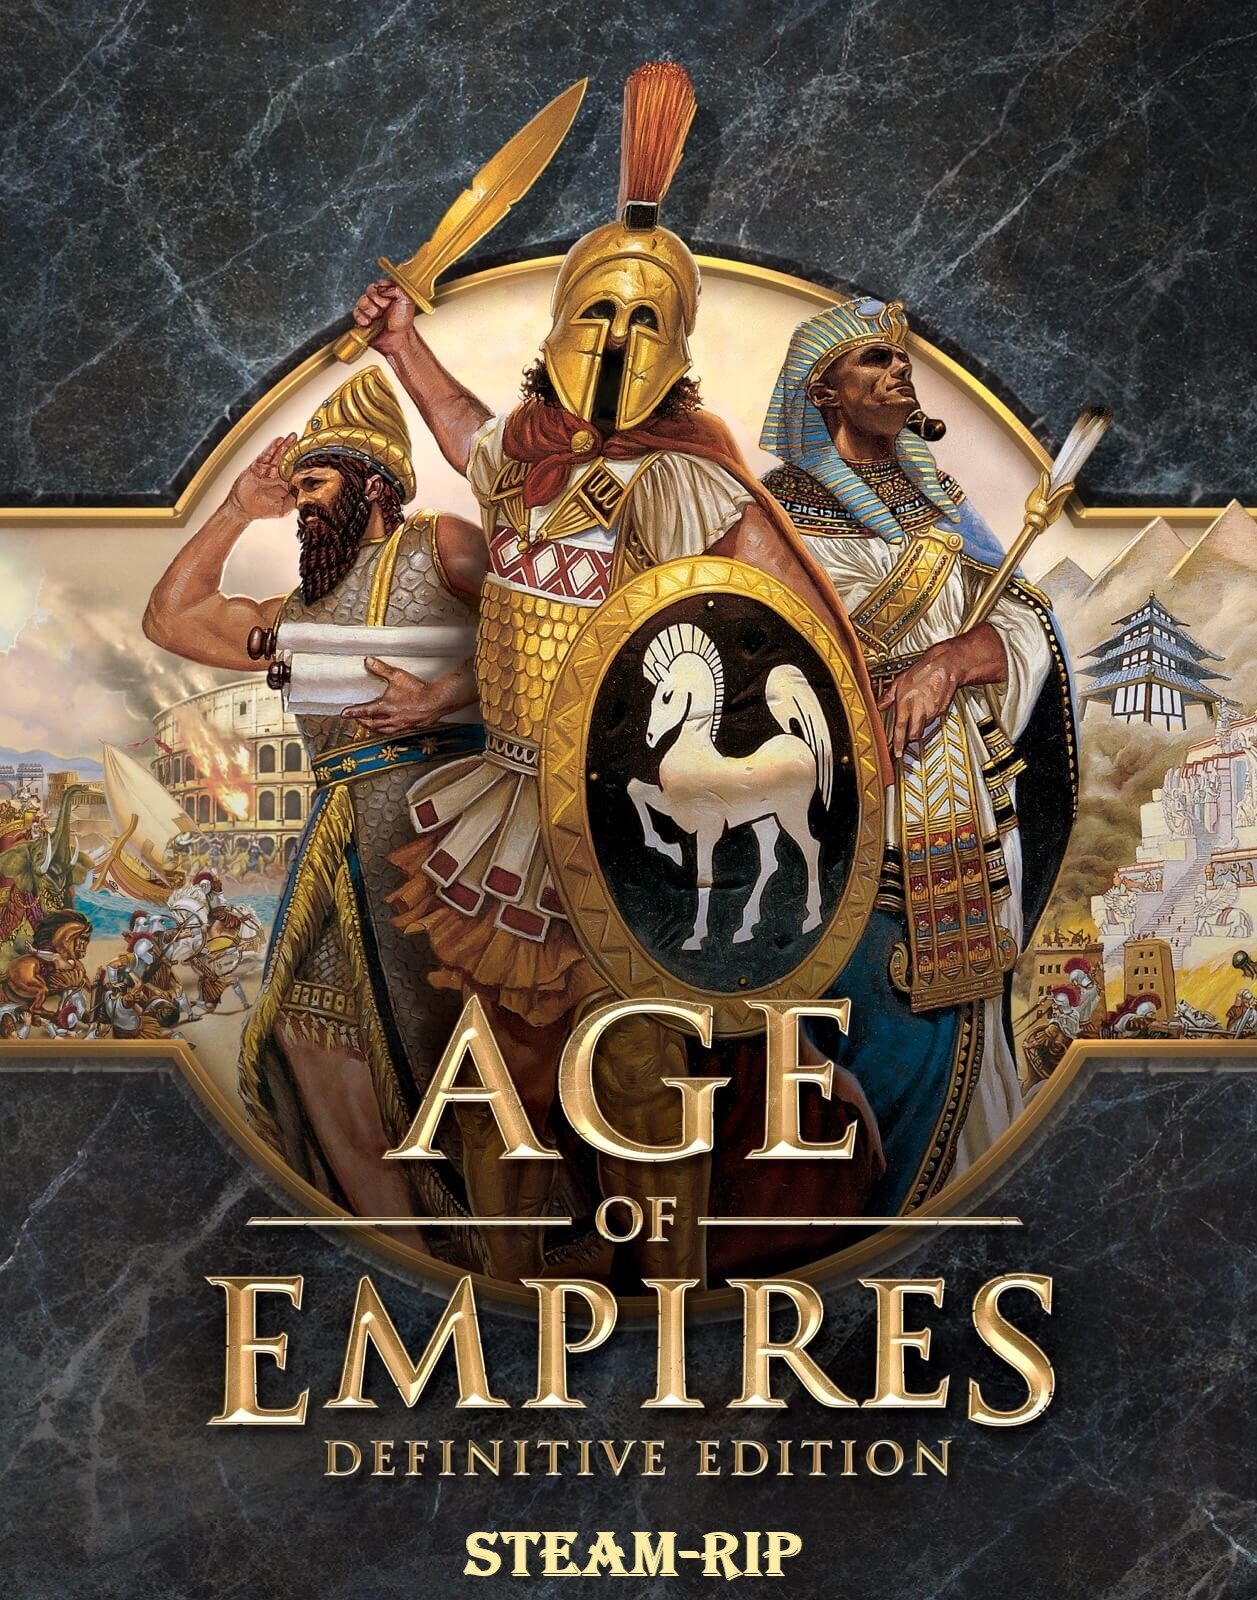 Age of Empires III: Definitive Edition [Steam-Rip] (2005-2020)